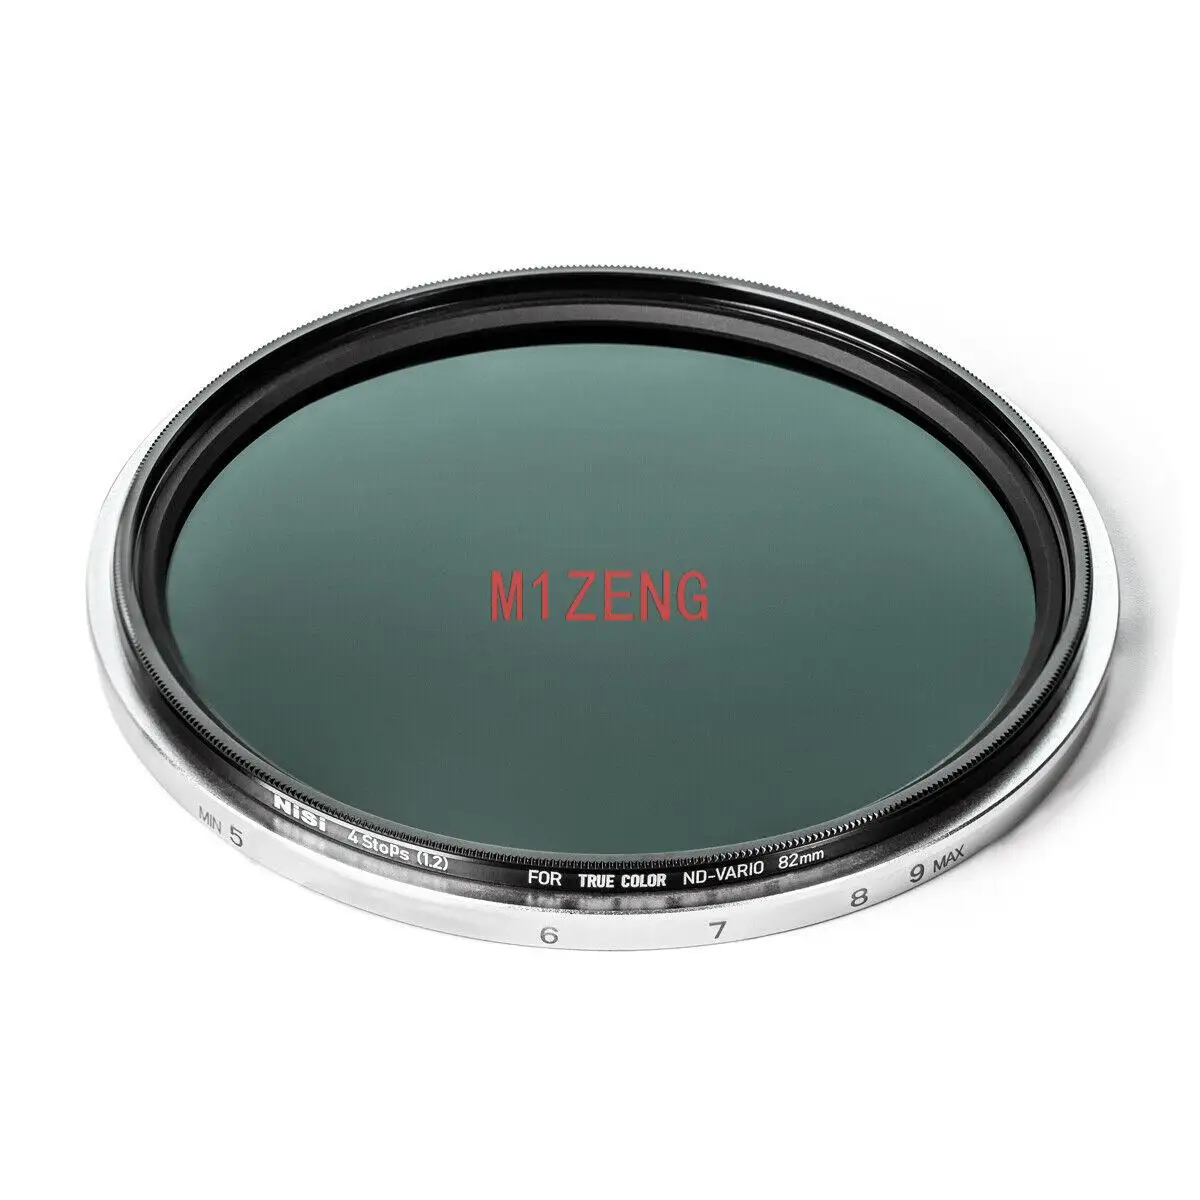 

ND16 (4 Stop) True Color Lens Filter protector for 67 72 77 82 95 Canon nikon sony pentax fuji olympus camera Swift vnd System